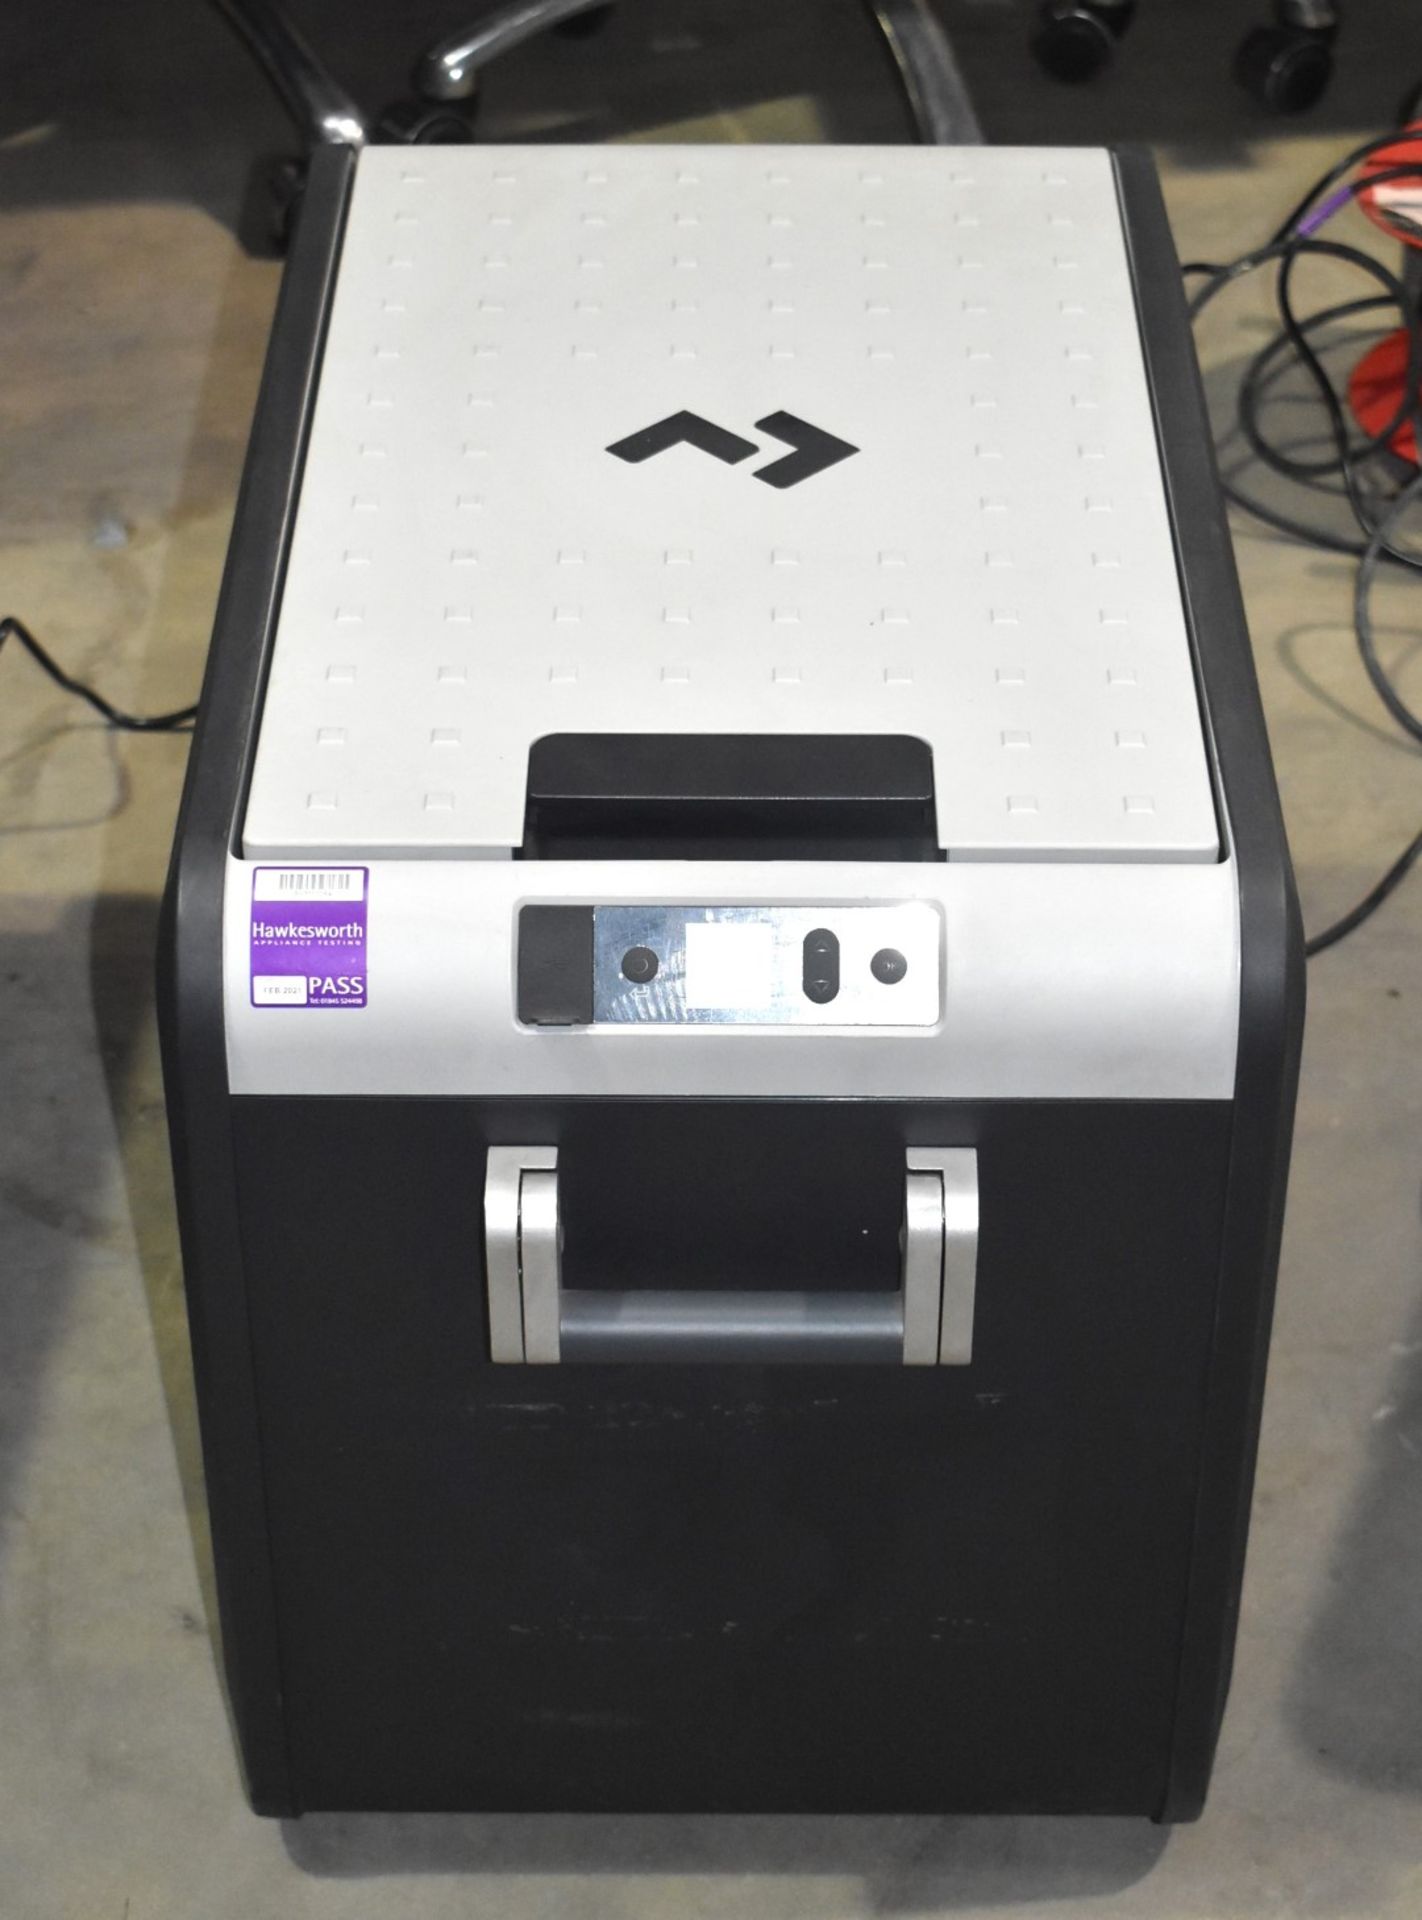 1 x Dometic CFX3 45 Portable 40l Compressor Cooler and Freezer - Features Bluetooth and WiFi - Image 2 of 10